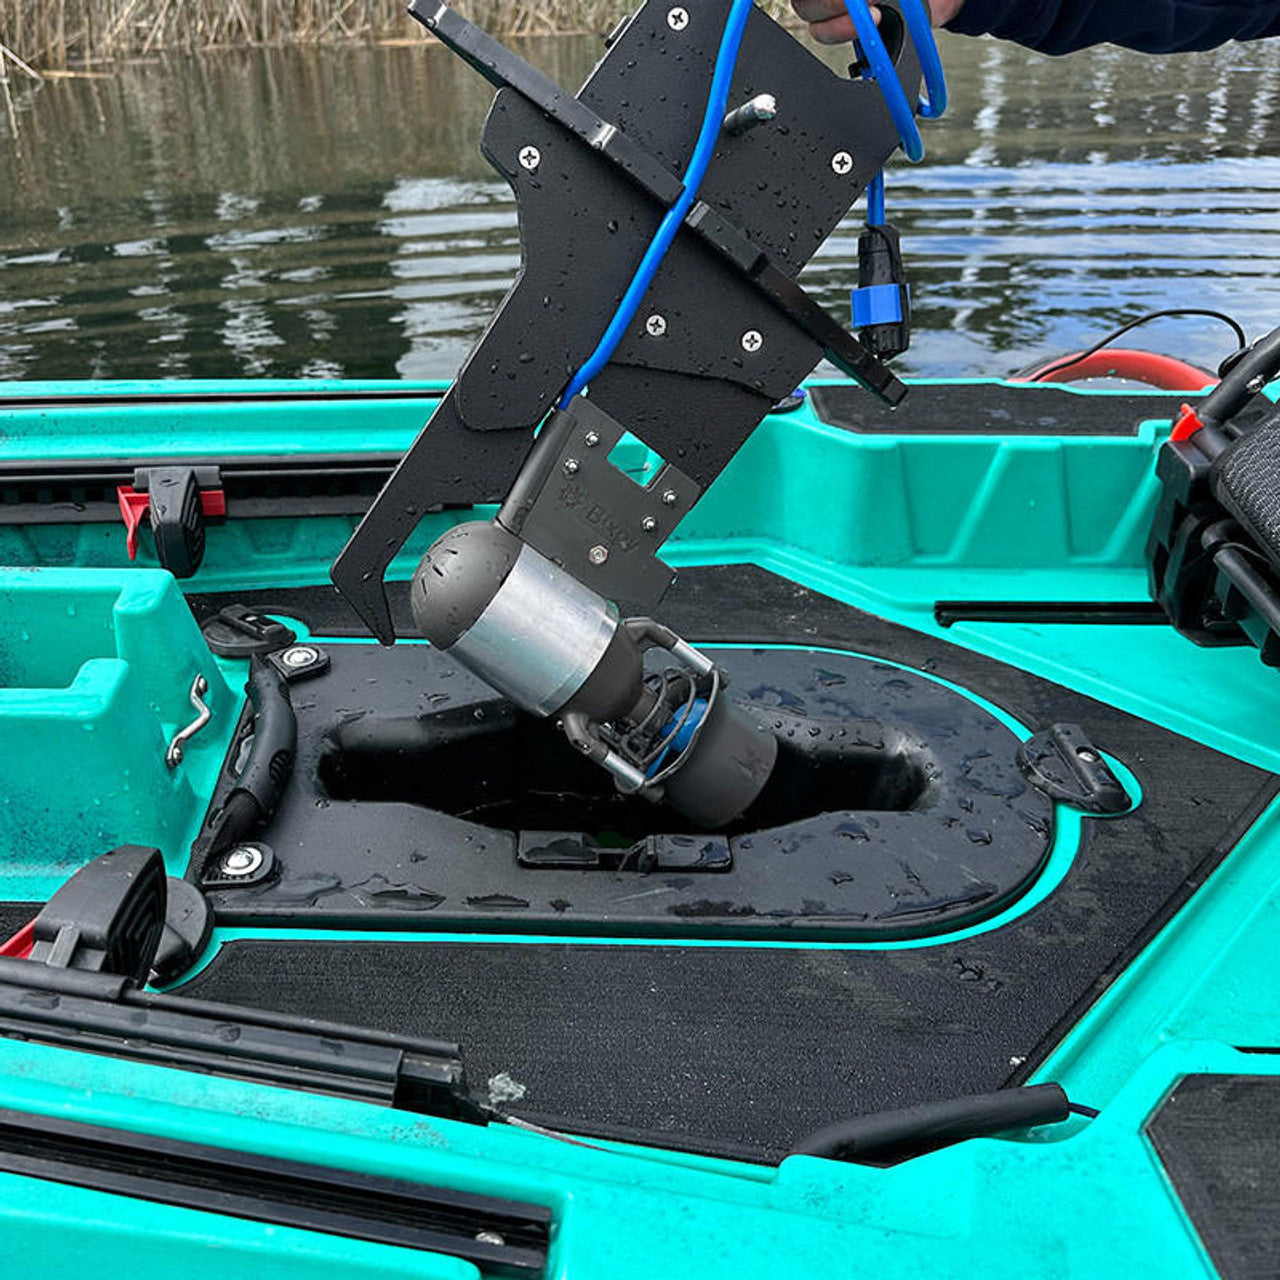 the Bixpy K-1 in use on a Pedal drive kayak like those from Vibe & Hobie